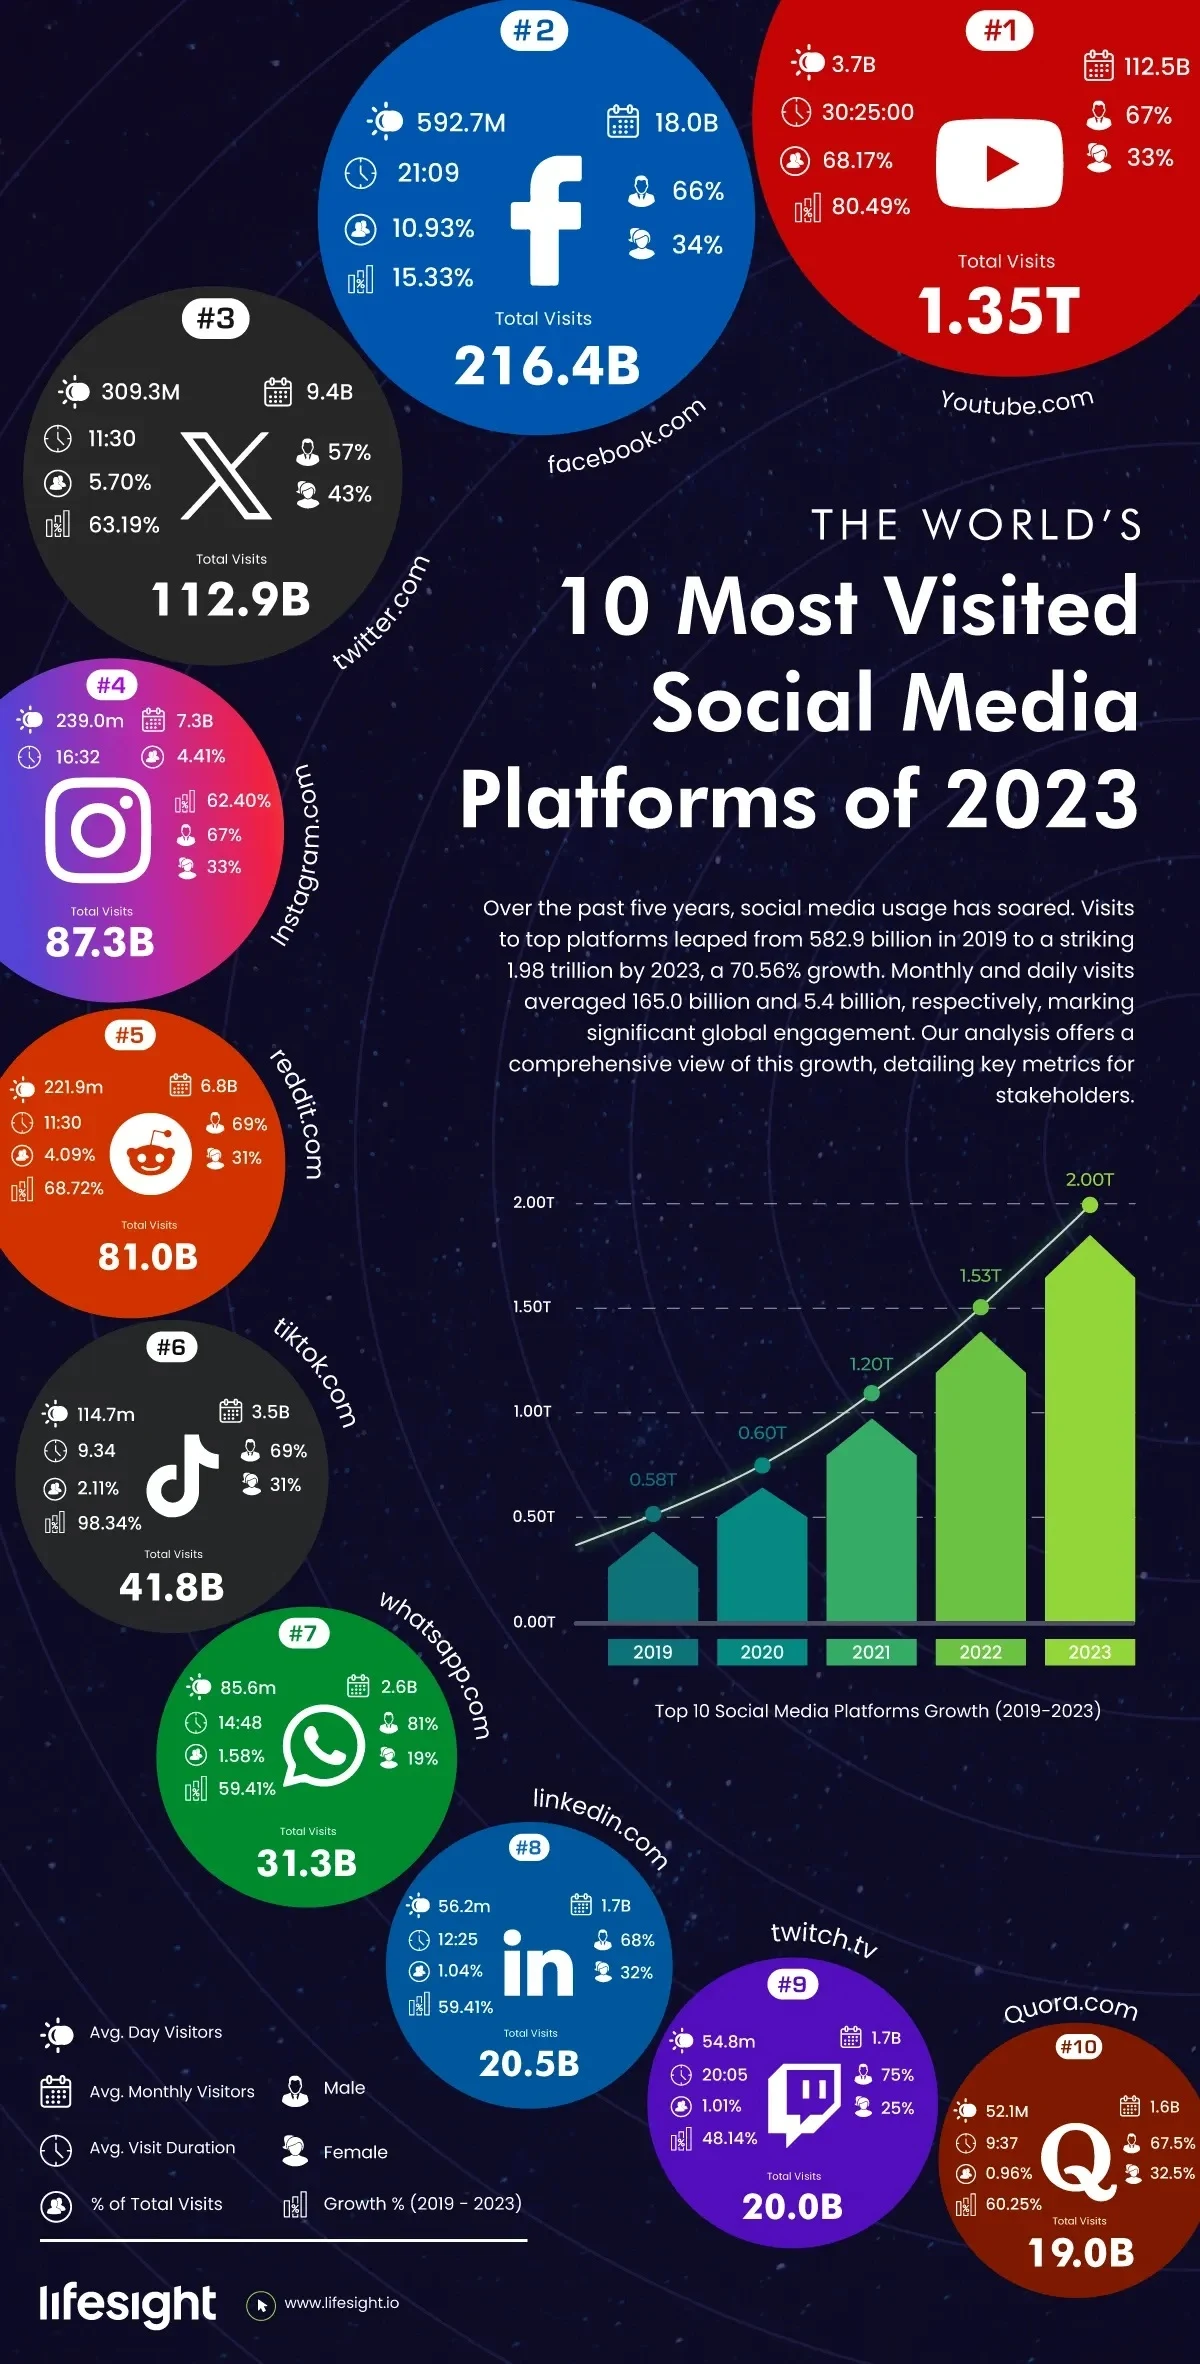 Social media's global growth skyrockets to 1.98 trillion visits in 2023, a significant surge from 582.9 billion in previous years.